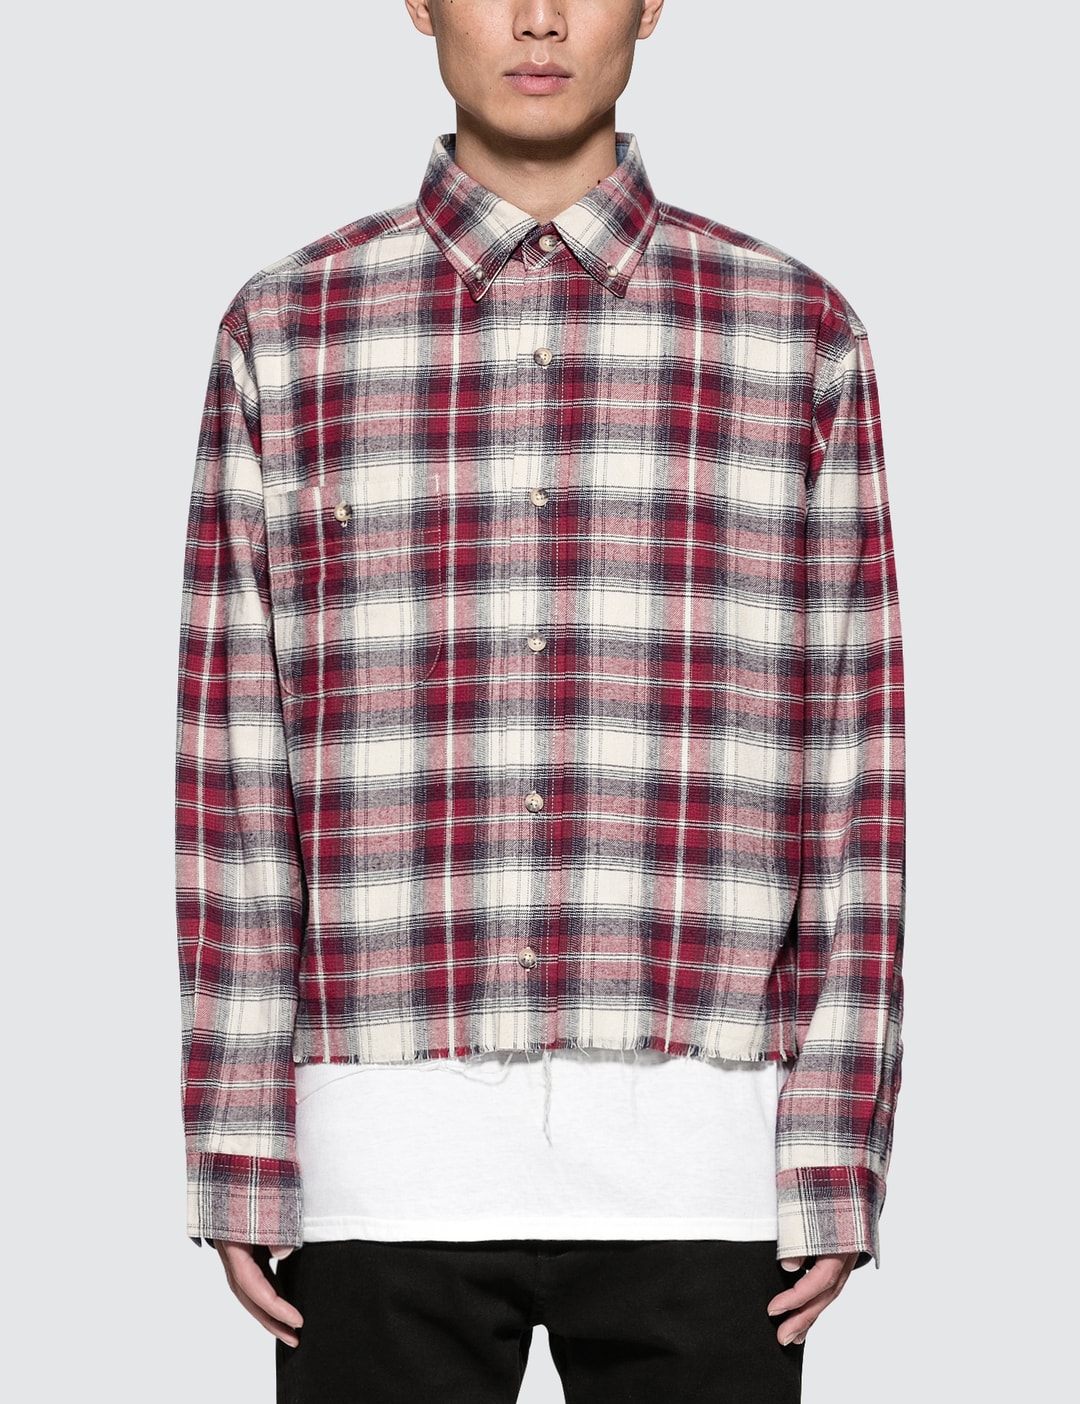 Matte Perle - Fake Cropped Flannel Shirt | HBX - Globally Curated ...